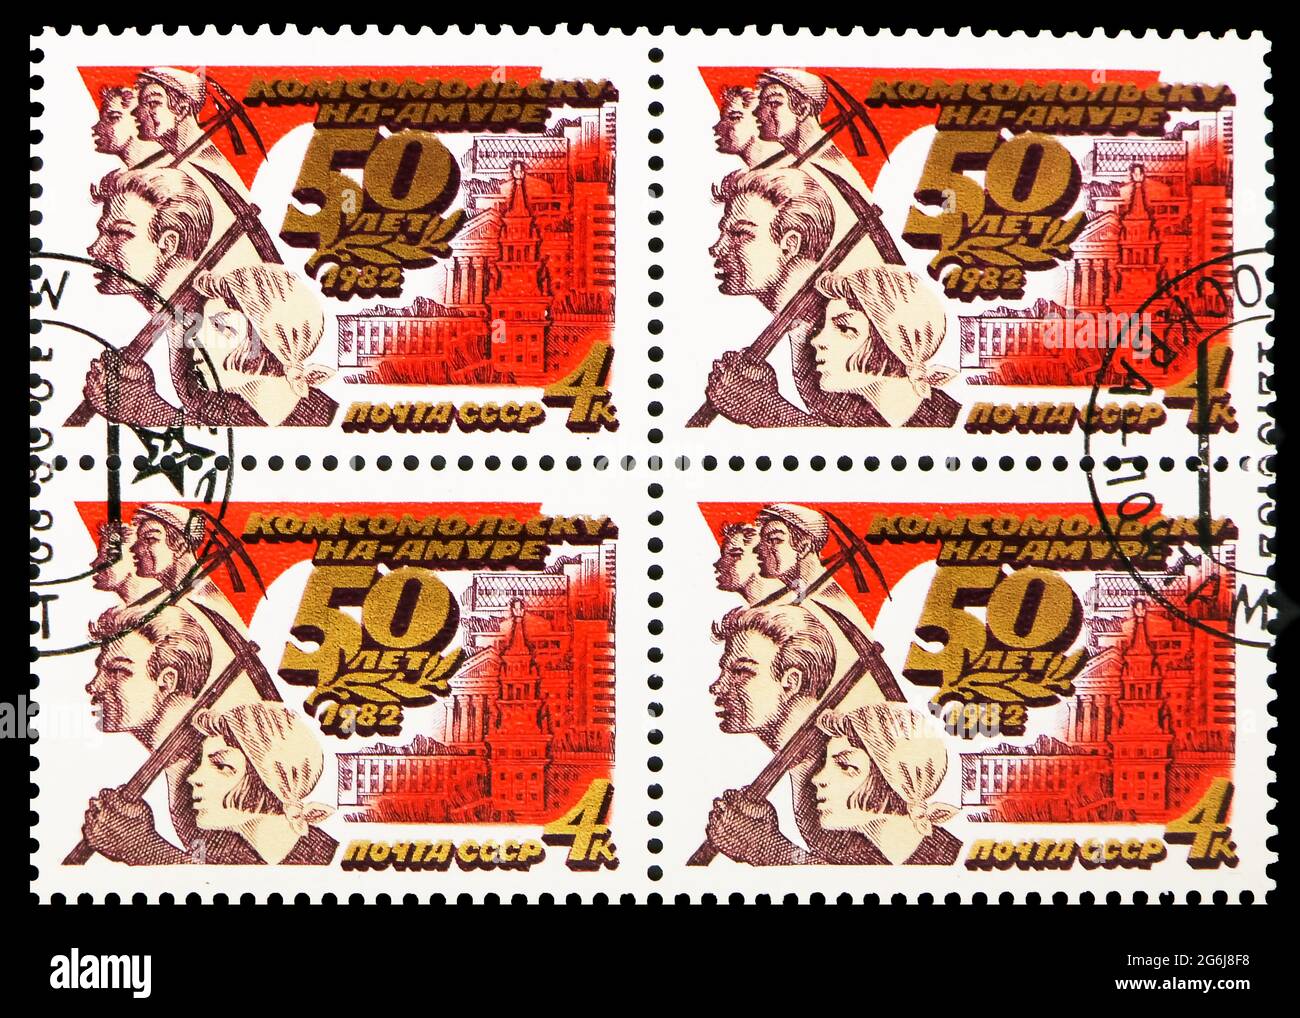 MOSCOW, RUSSIA - MARCH 21, 2020: Four postage stamps printed in Soviet Union devoted to 50th Anniversary of Komsomolsk-on-Amur, serie, circa 1982 Stock Photo